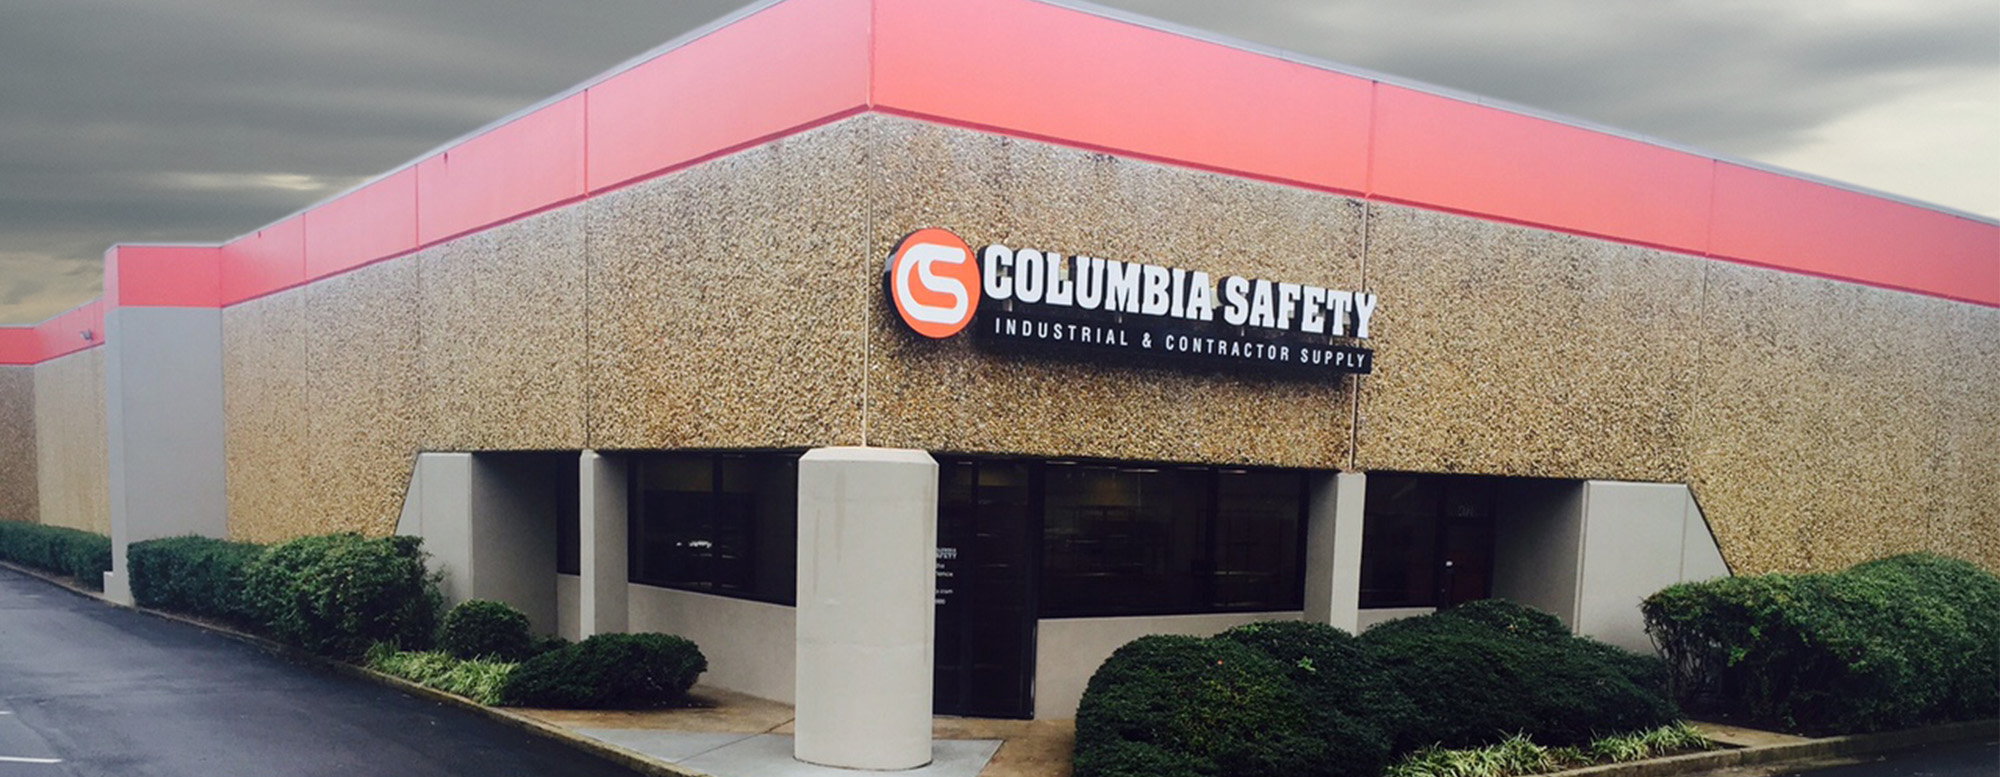 Columbia Safety and Supply's Storefront & Distribution Center located in Atlanta, GA